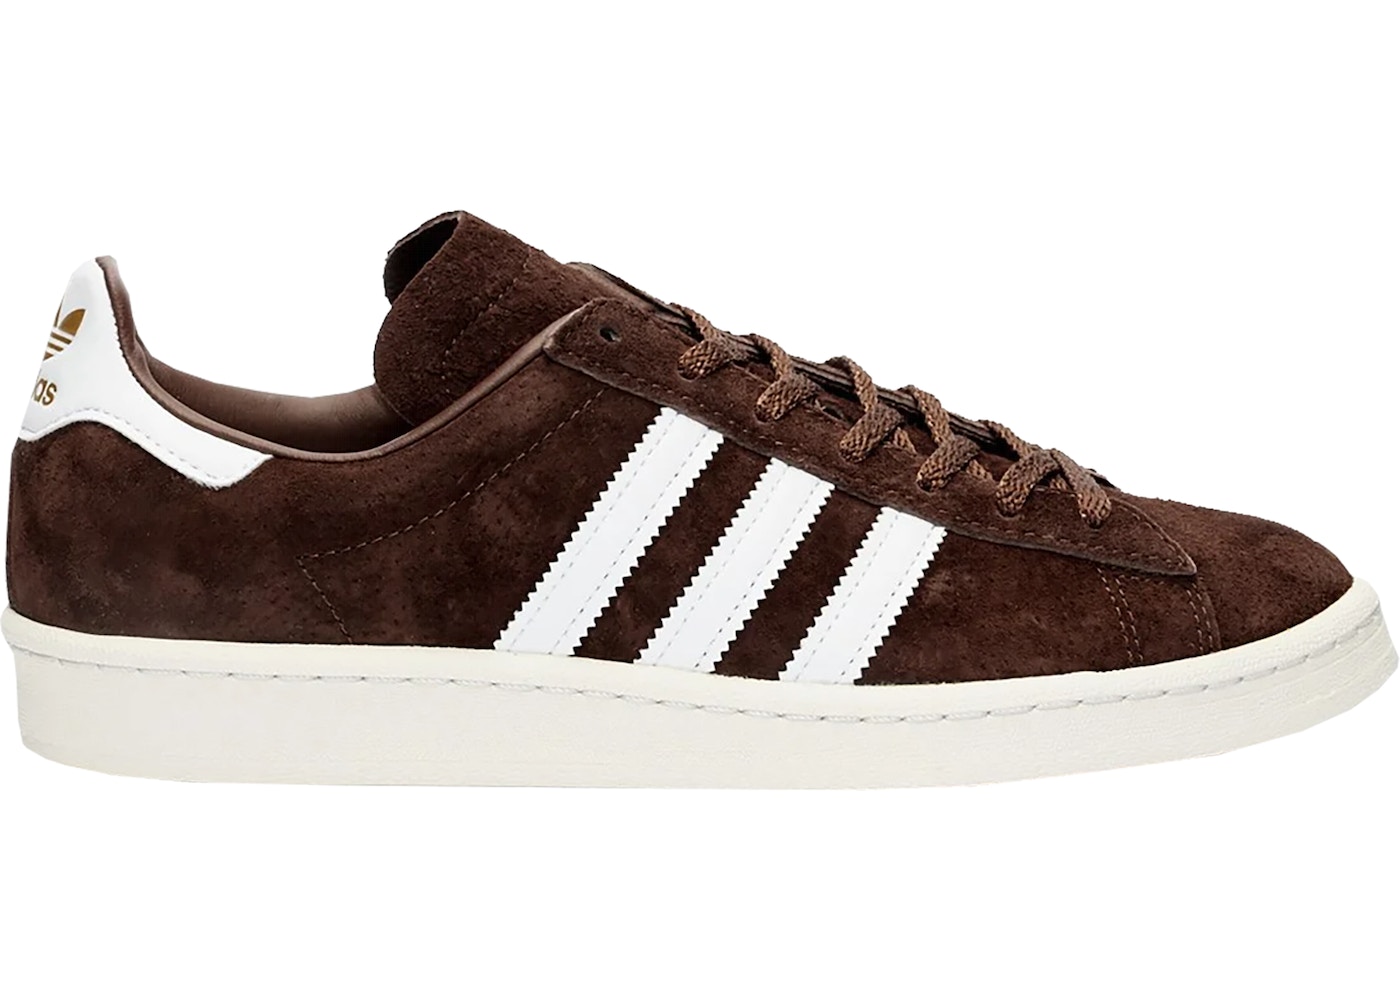 adidas Campus Homemade Pack Brown - FW6757